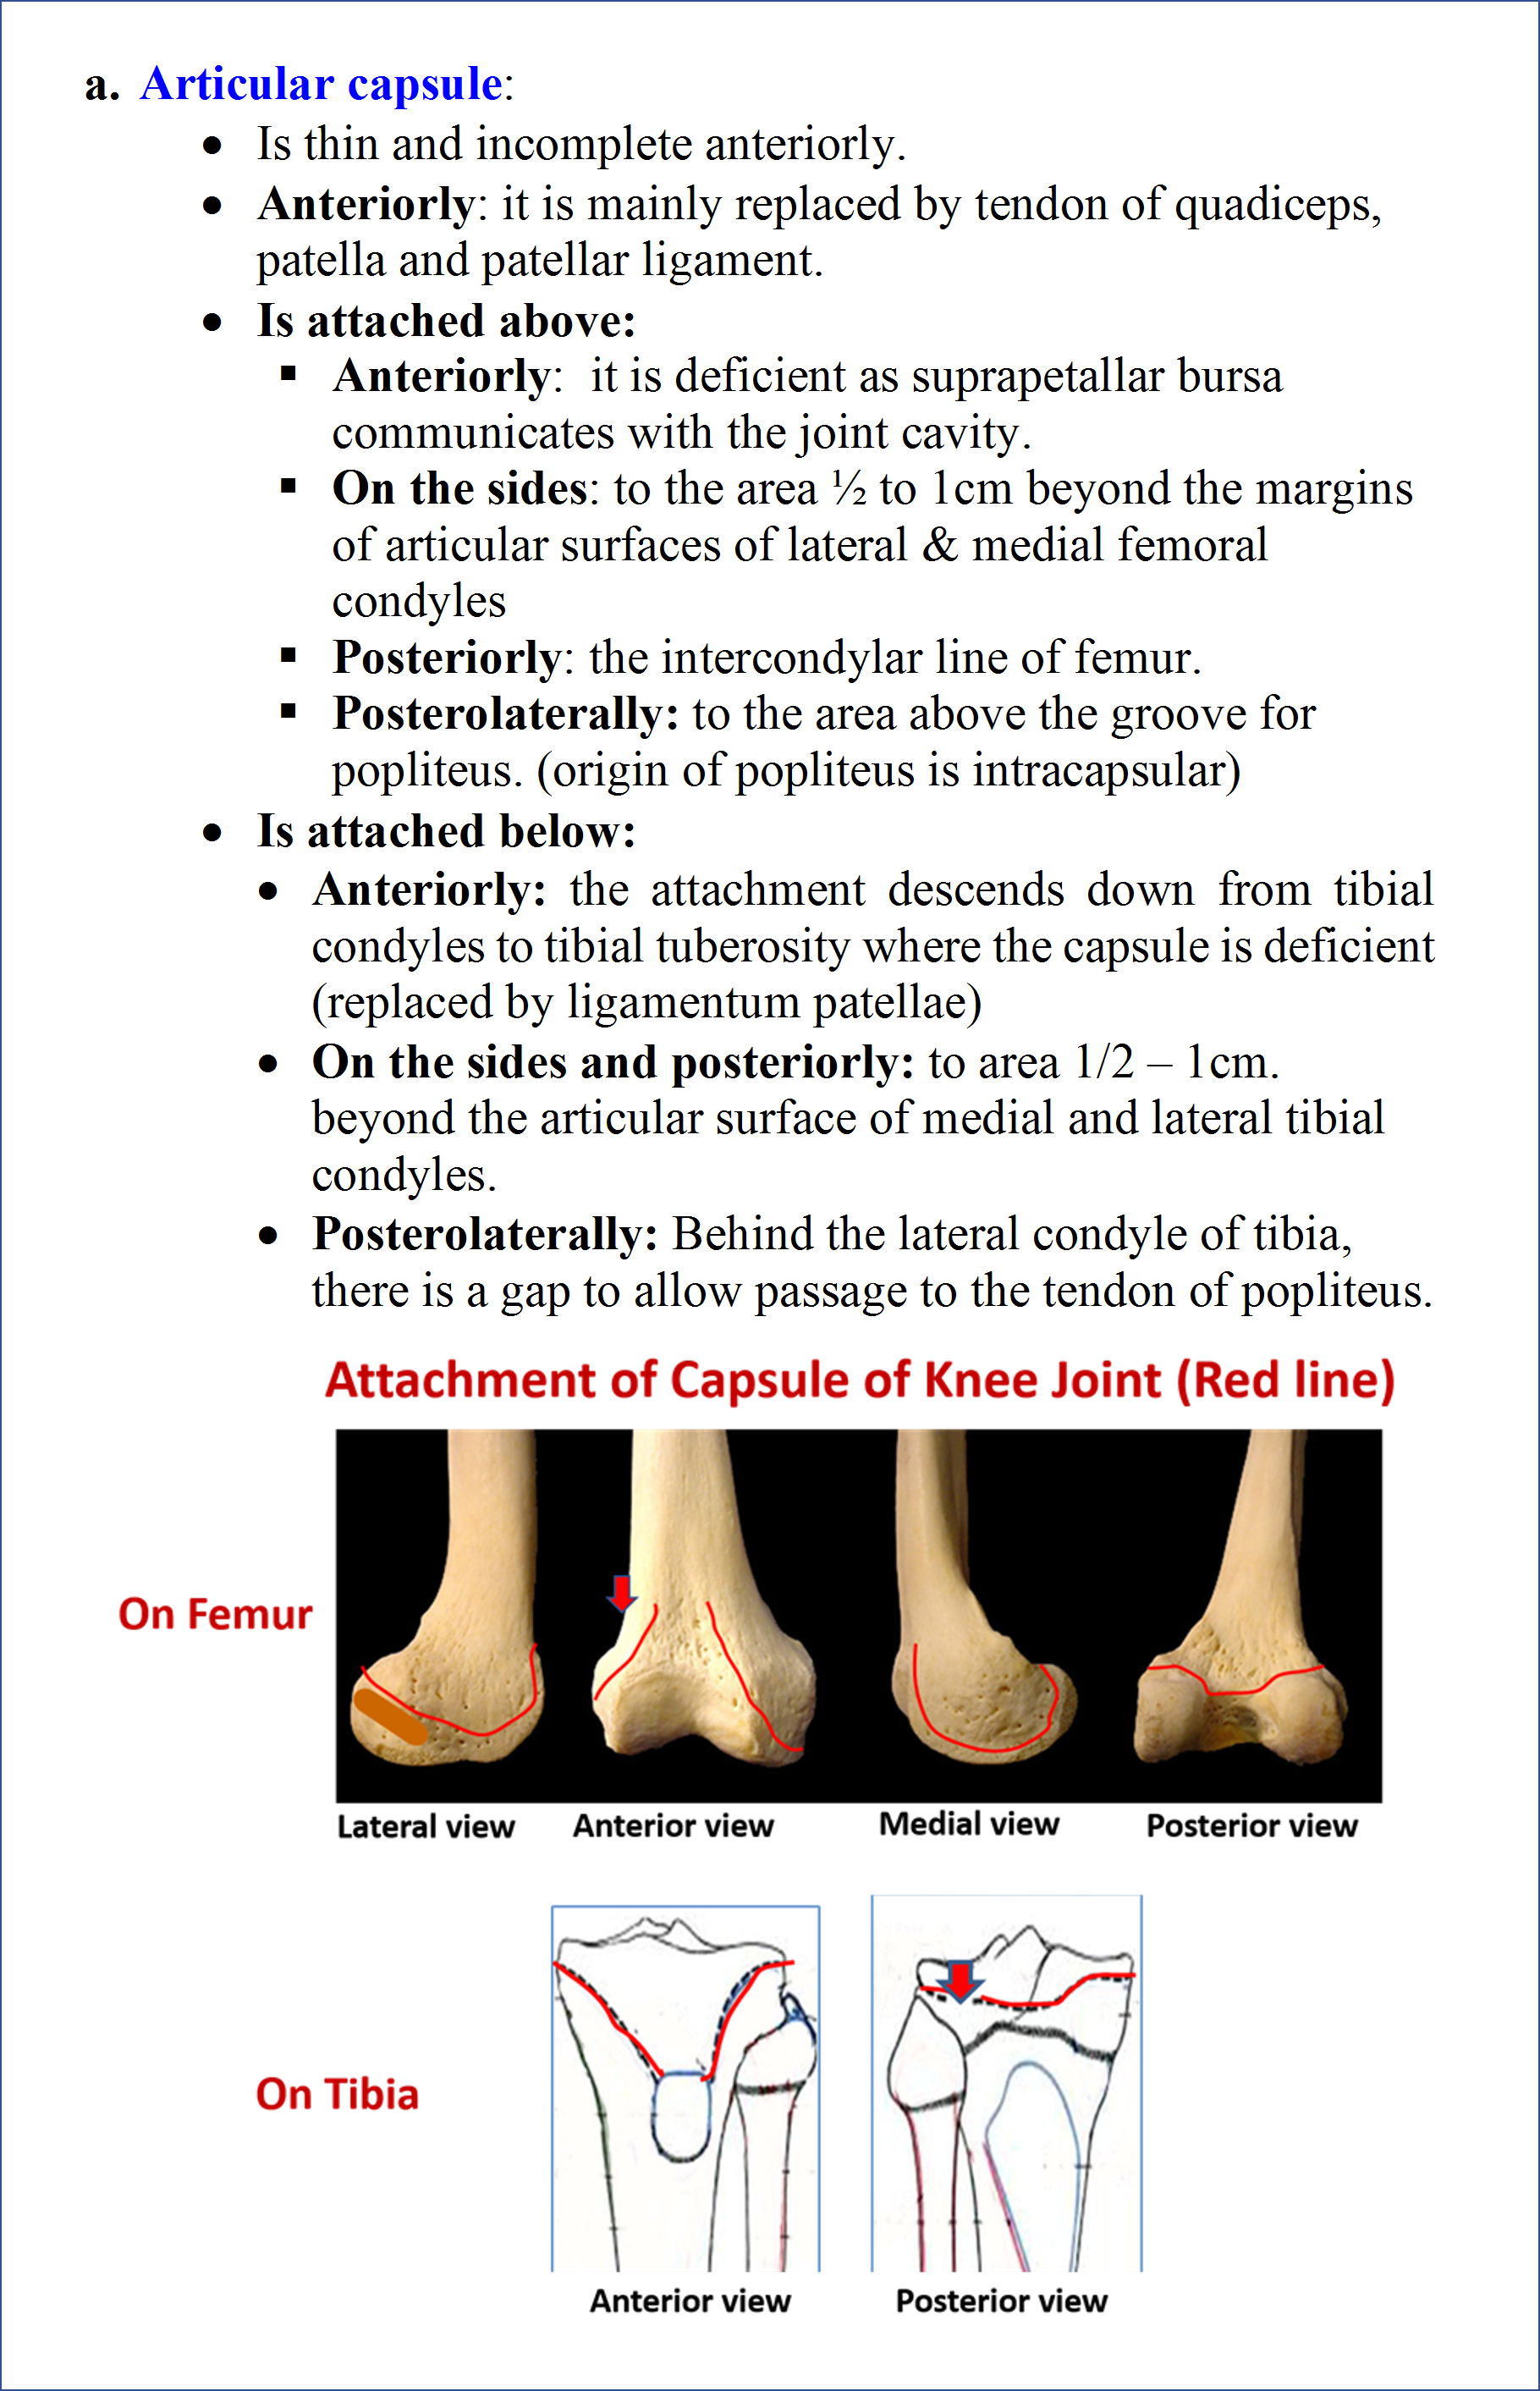 Knee joint - articular surfaces